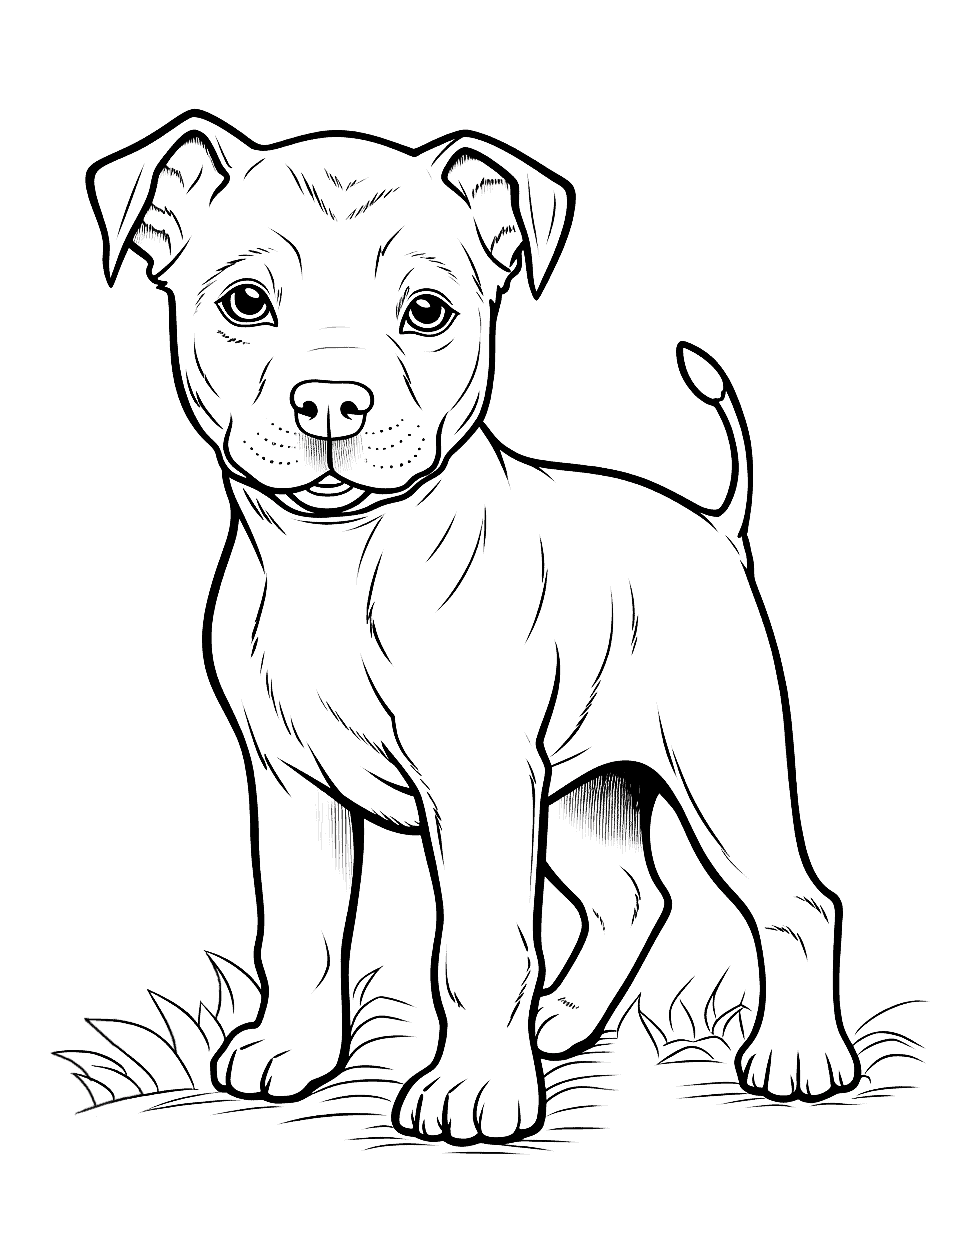 Brave and Strong Pitbull Puppy Coloring Page - A Pitbull puppy showing its bravery and strength, perfect for older kids.